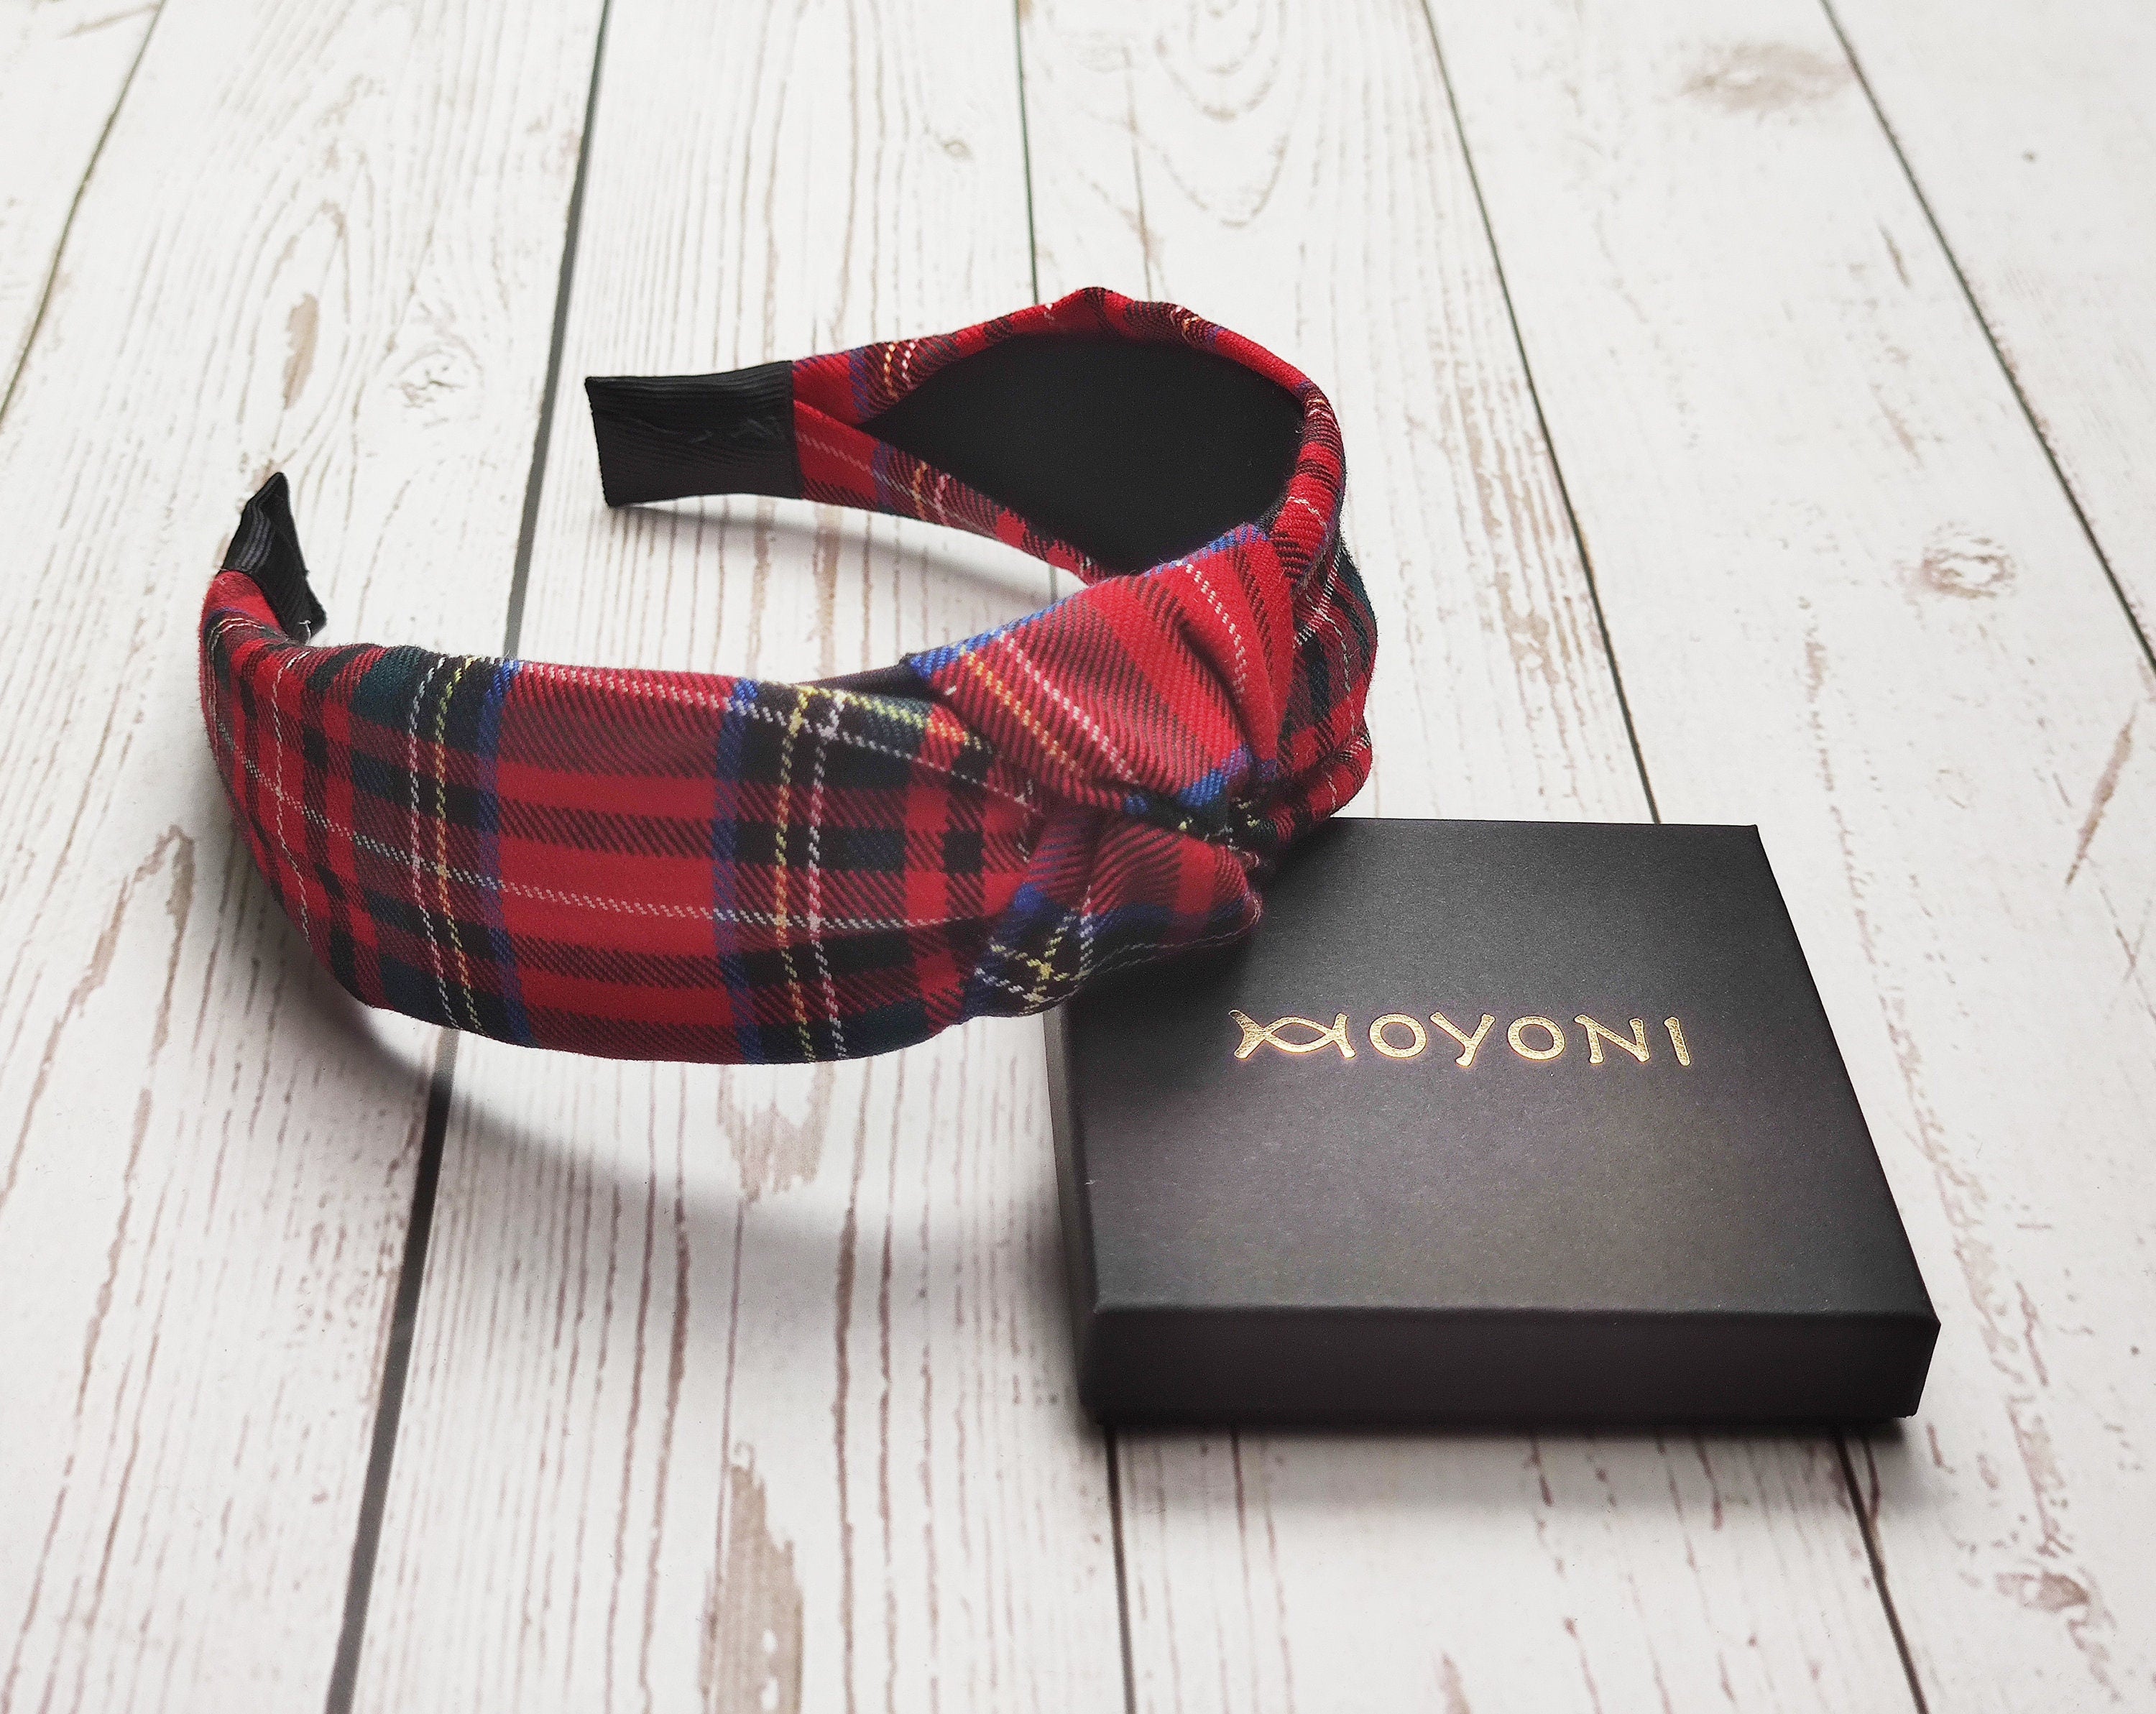 Looking for a fashionable and trendy headband to rock this autumn and winter? Check out our selection of red plaid pattern headbands for women. They will add a touch of style to your outfit and keep your hair healthy and sleek.